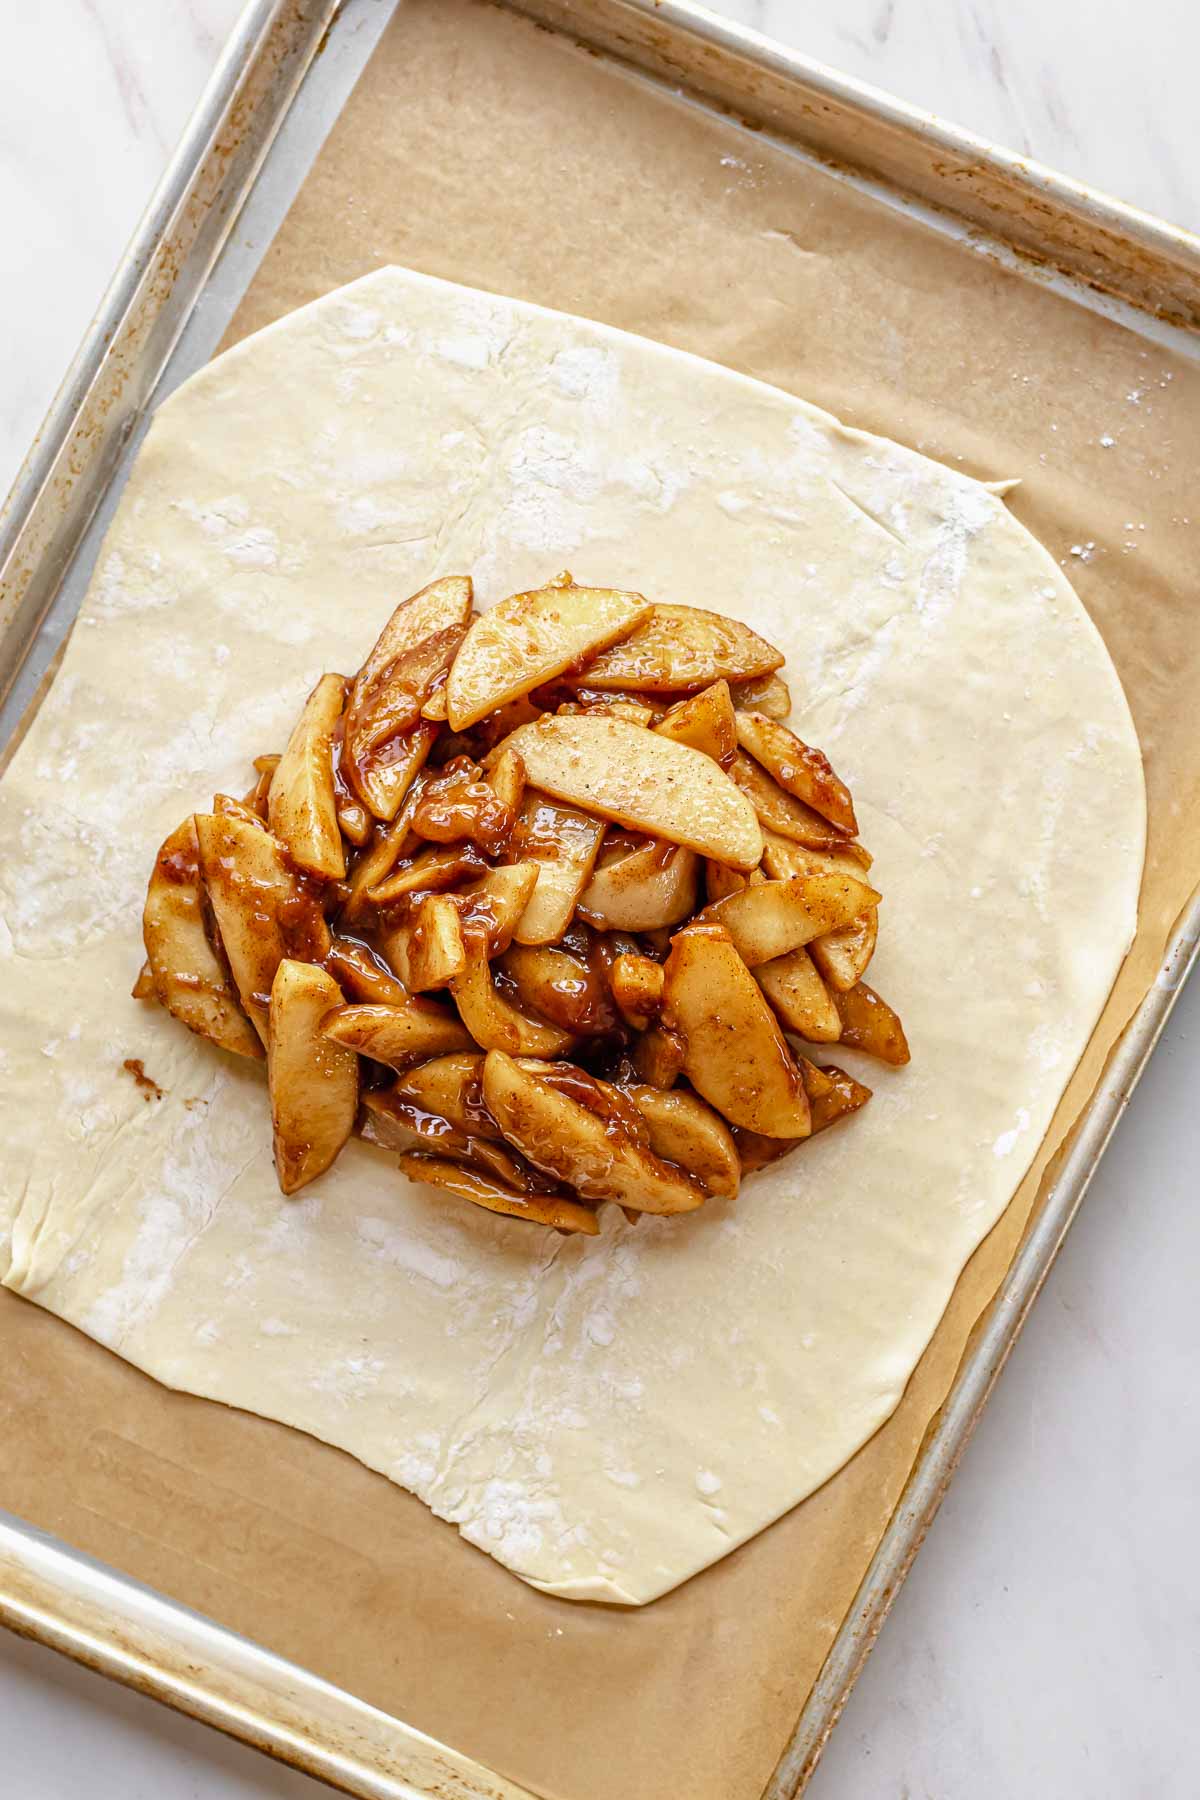 Apples mounded in the center of a piece of puff pastry.